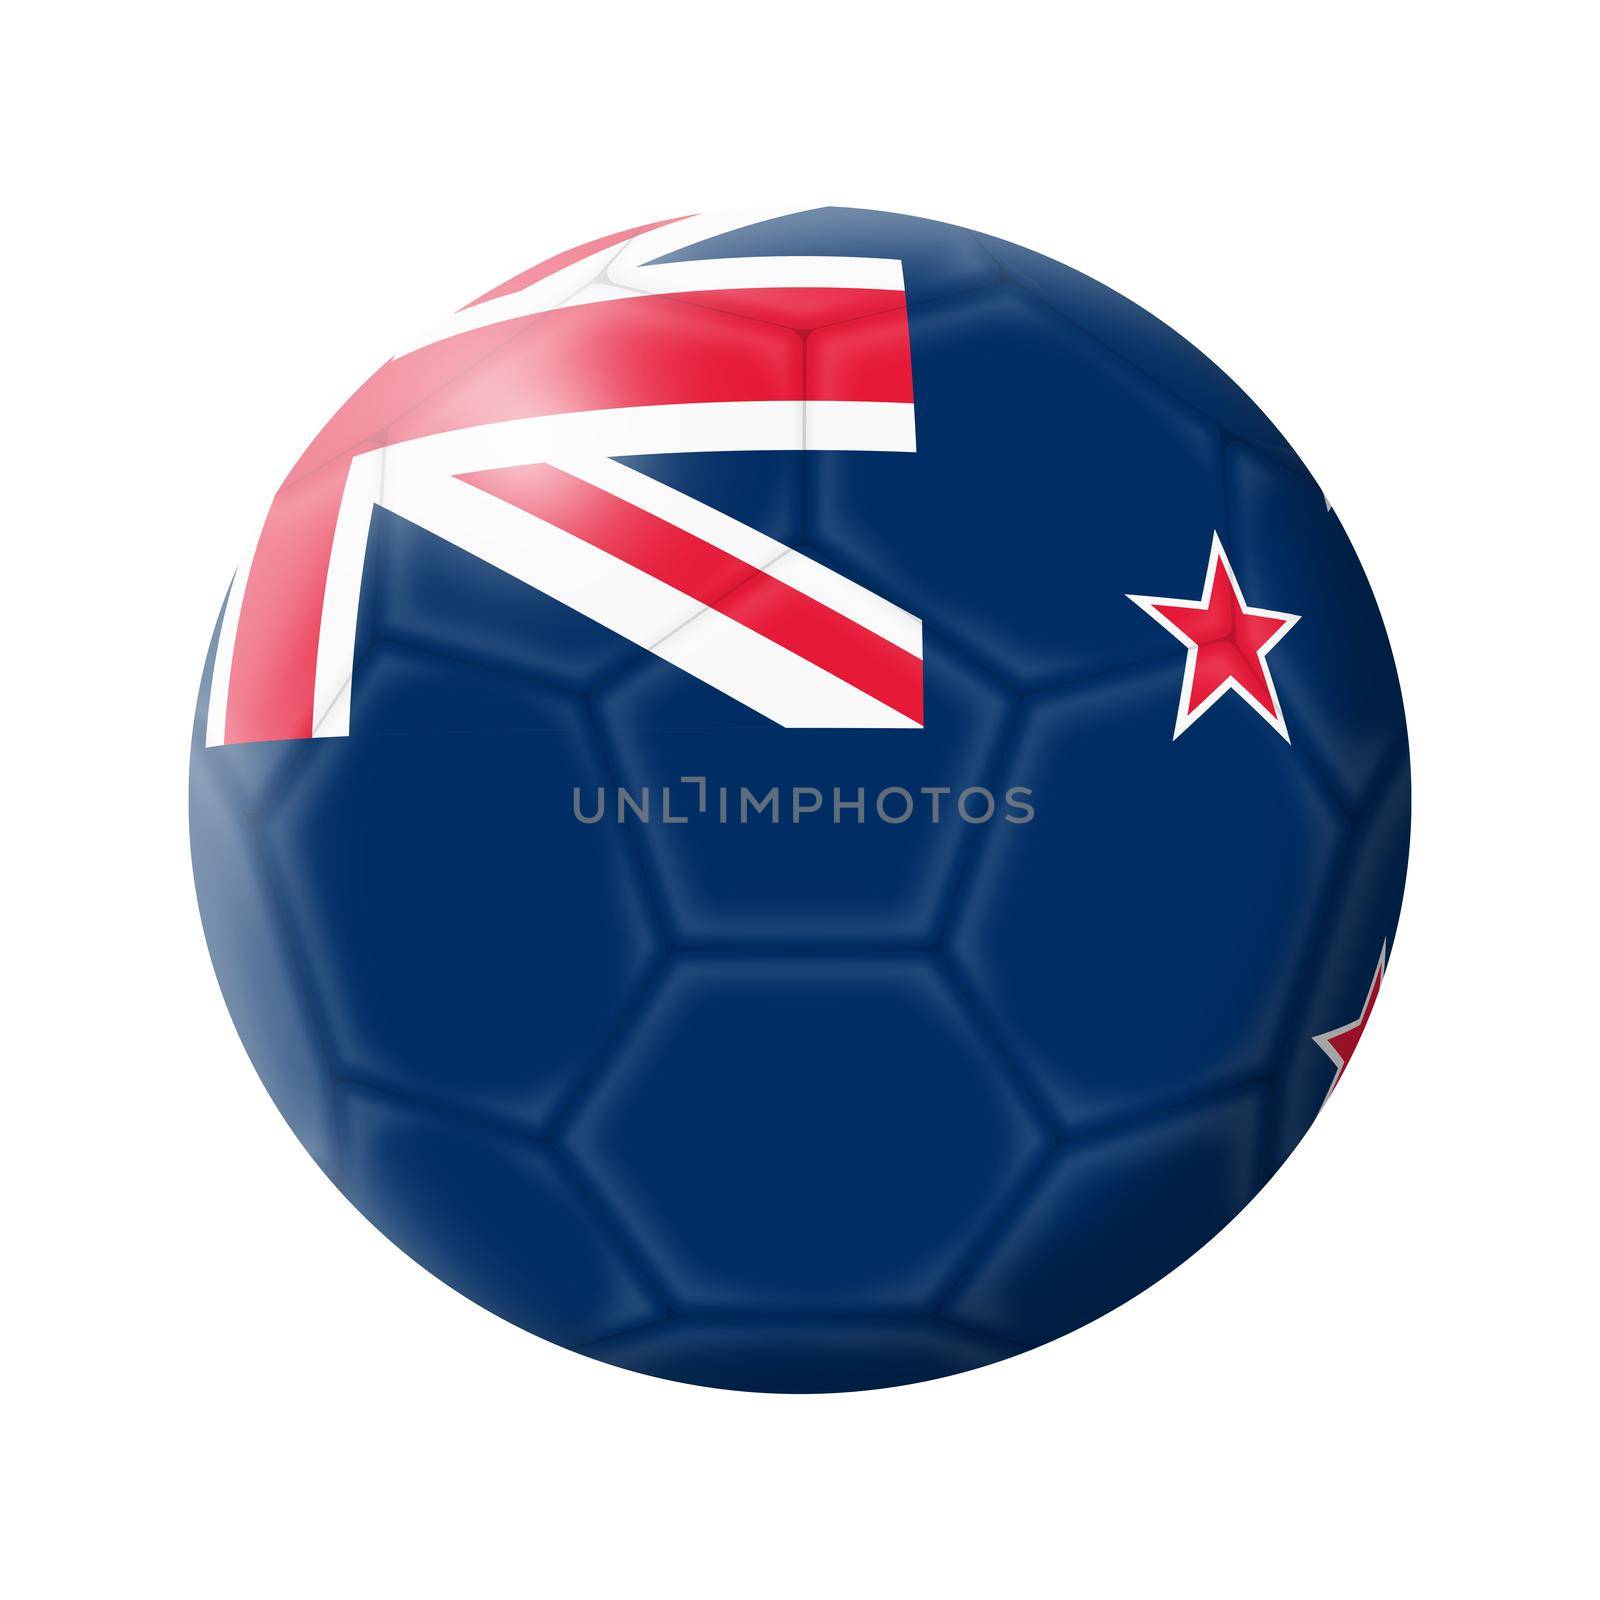 A New Zealand soccer ball football 3d illustration isolated on white with clipping path